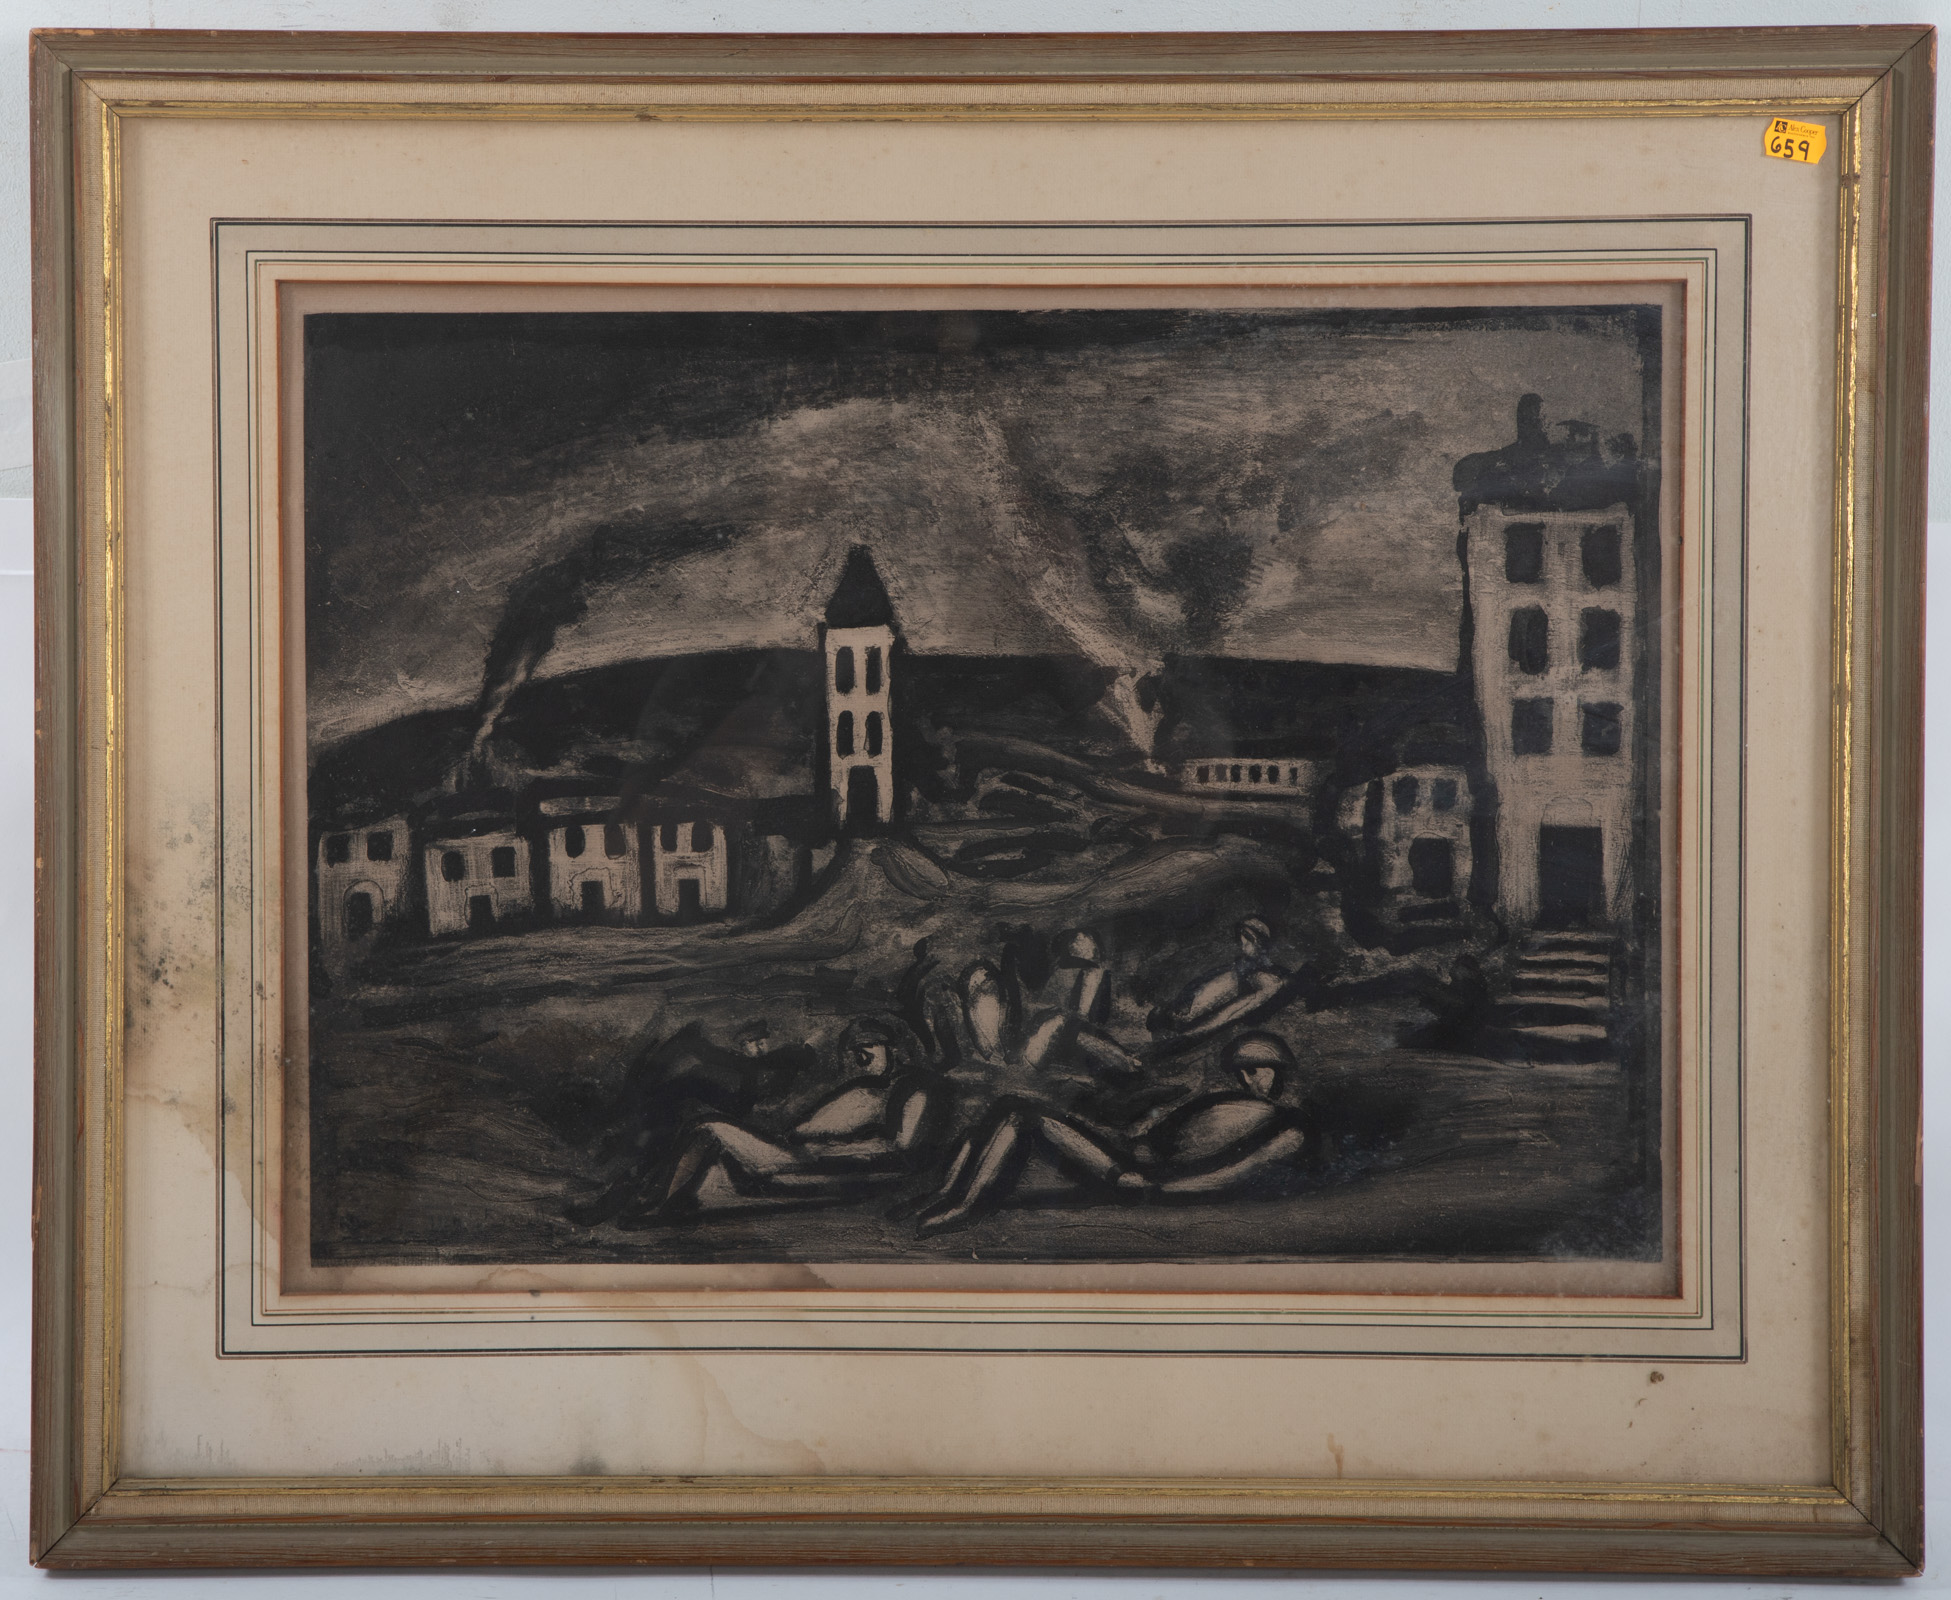 GEORGES ROUAULT. AQUATINT FROM